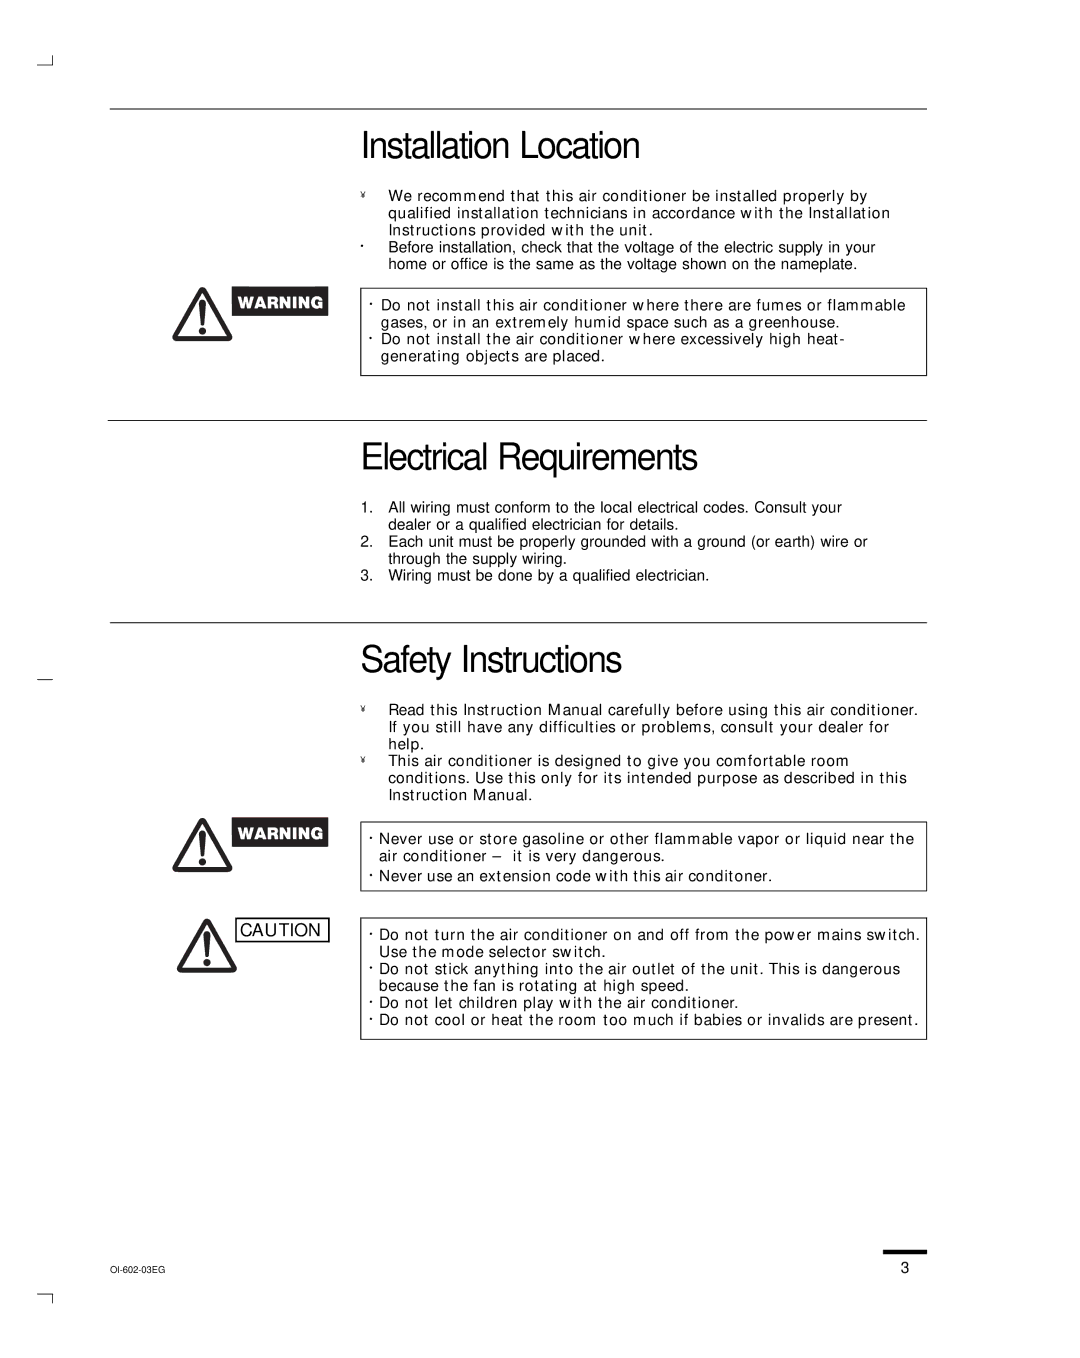 Sanyo STB1220C1, STB0810C1, STB1020C1, STB1010C1 Installation Location, Electrical Requirements, Safety Instructions 